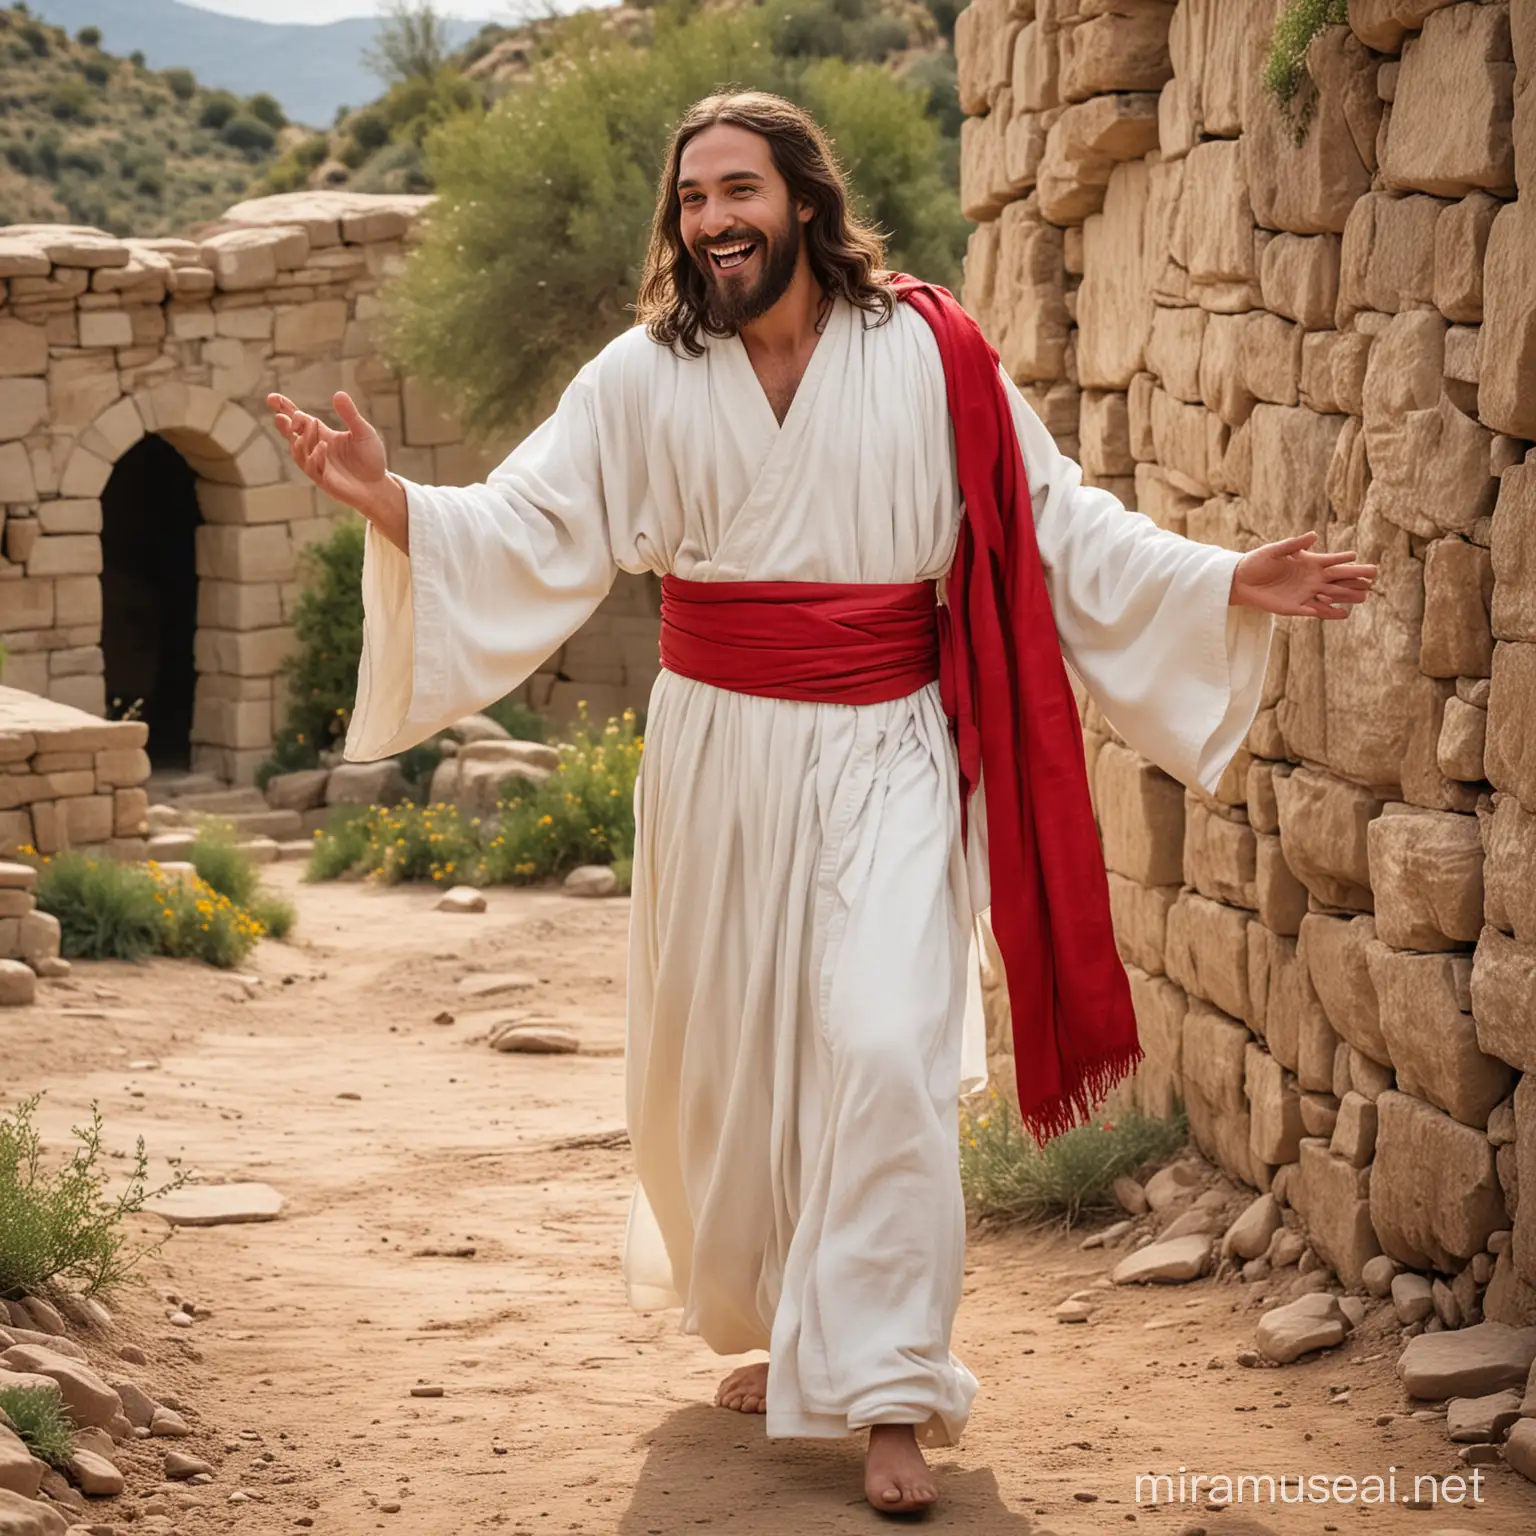 Jesus leaving his natural stone tomb, cheeky grin, happy to be resurrected, about to dance. Wearing a white robe with a red sash around his waist only. Full body